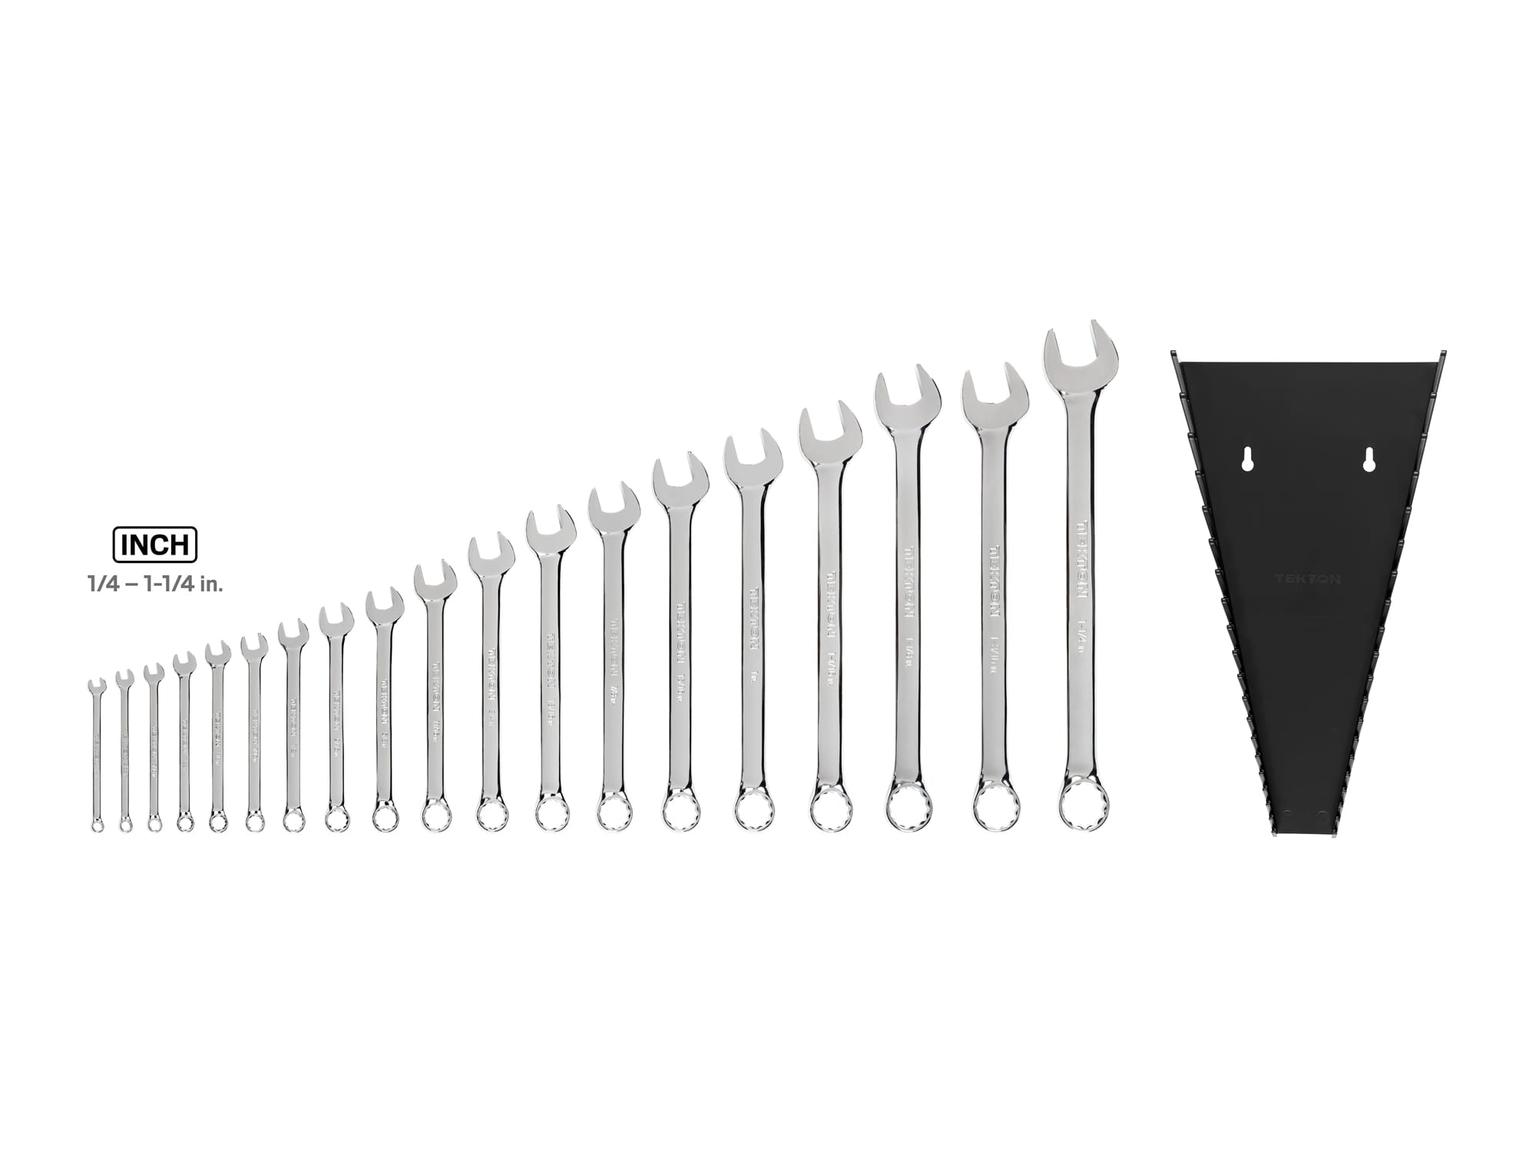 TEKTON WCB91102-T Combination Wrench Set with Rack, 19-Piece (1/4 - 1-1/4 in.)